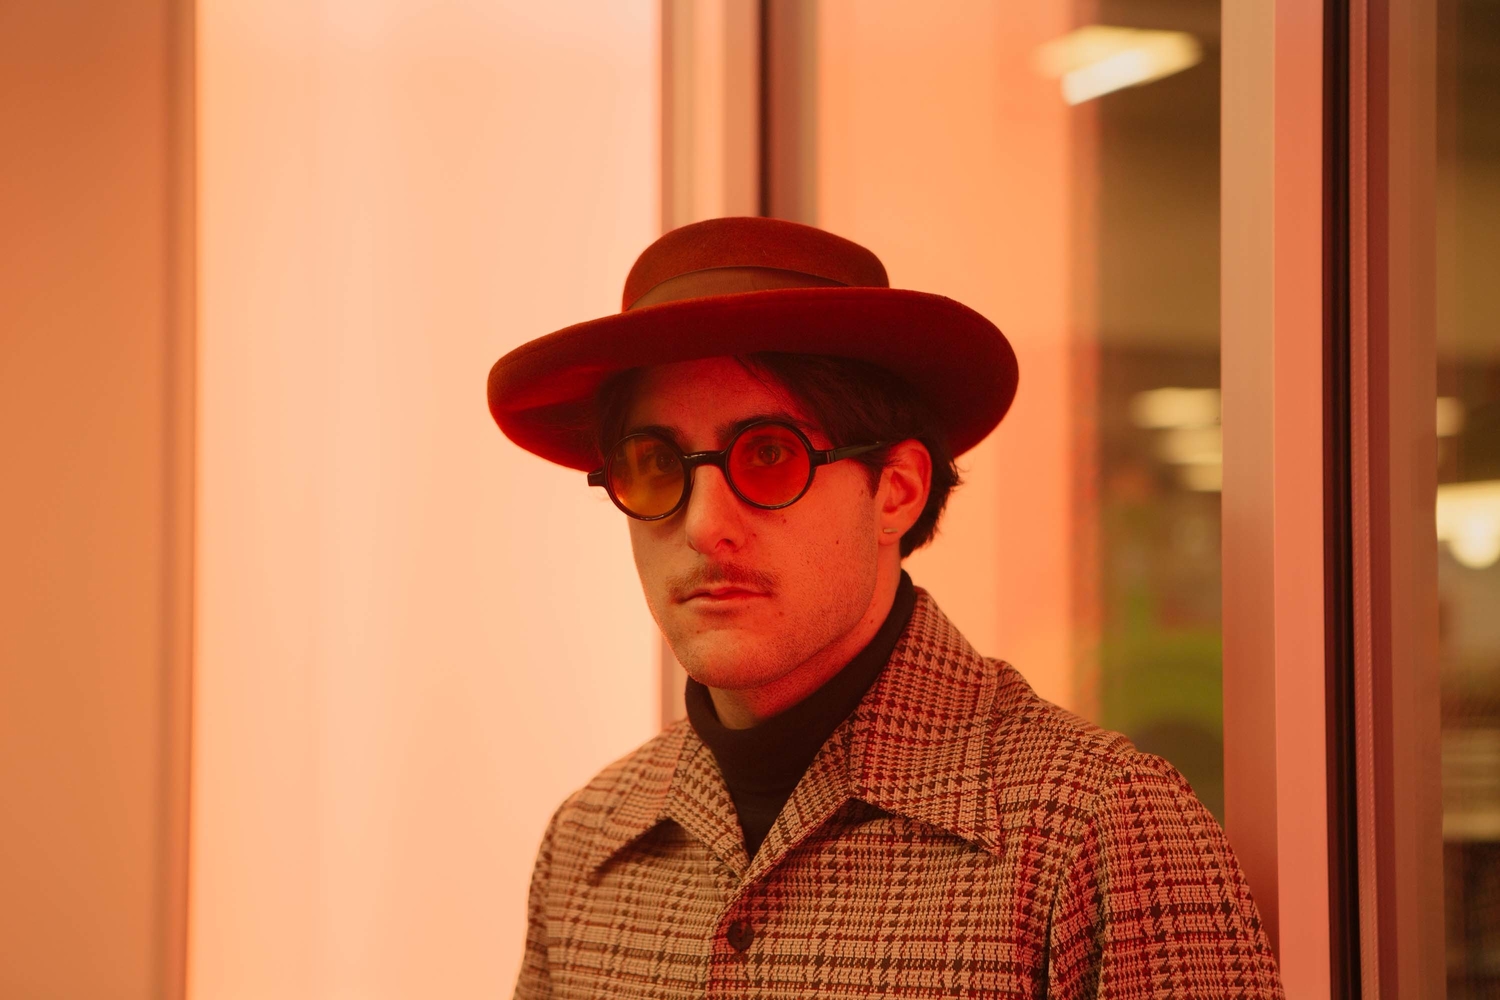 Hear HALFNOISE’s new EP ‘The Velvet Face’ in its entirety